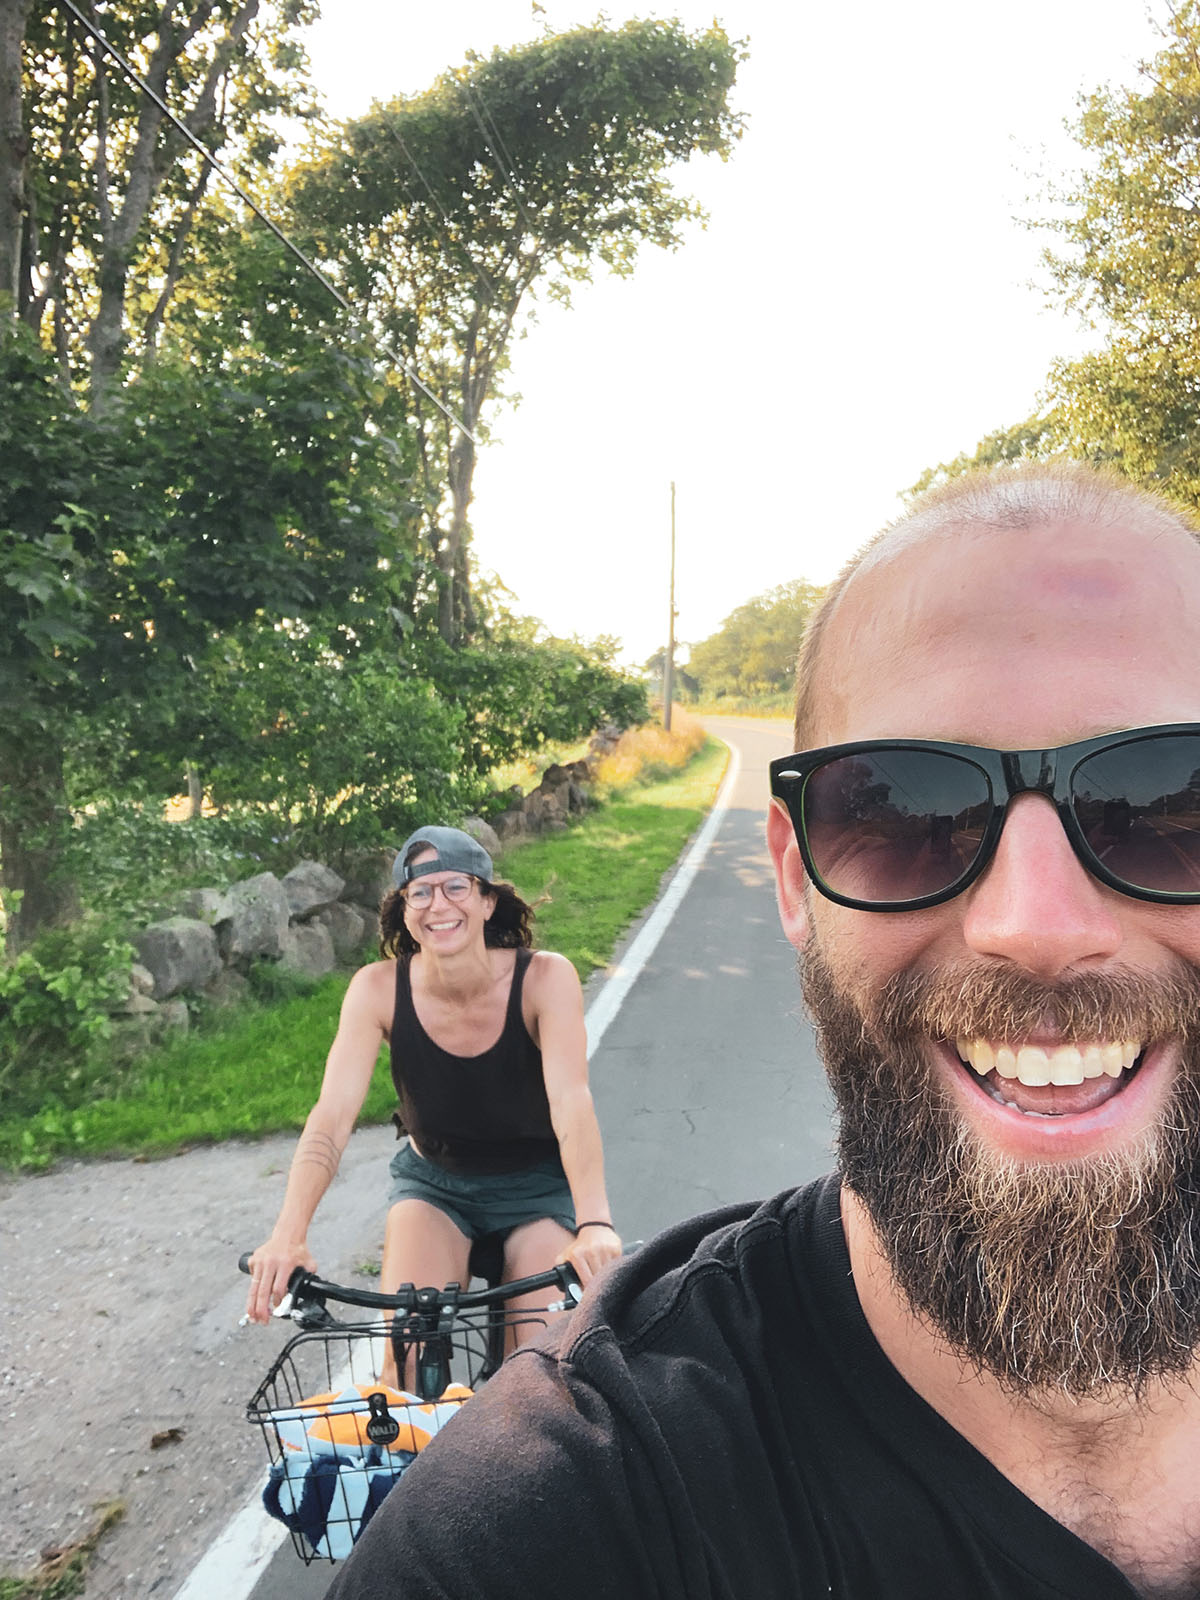 A man and a woman smiling while riding bikes.